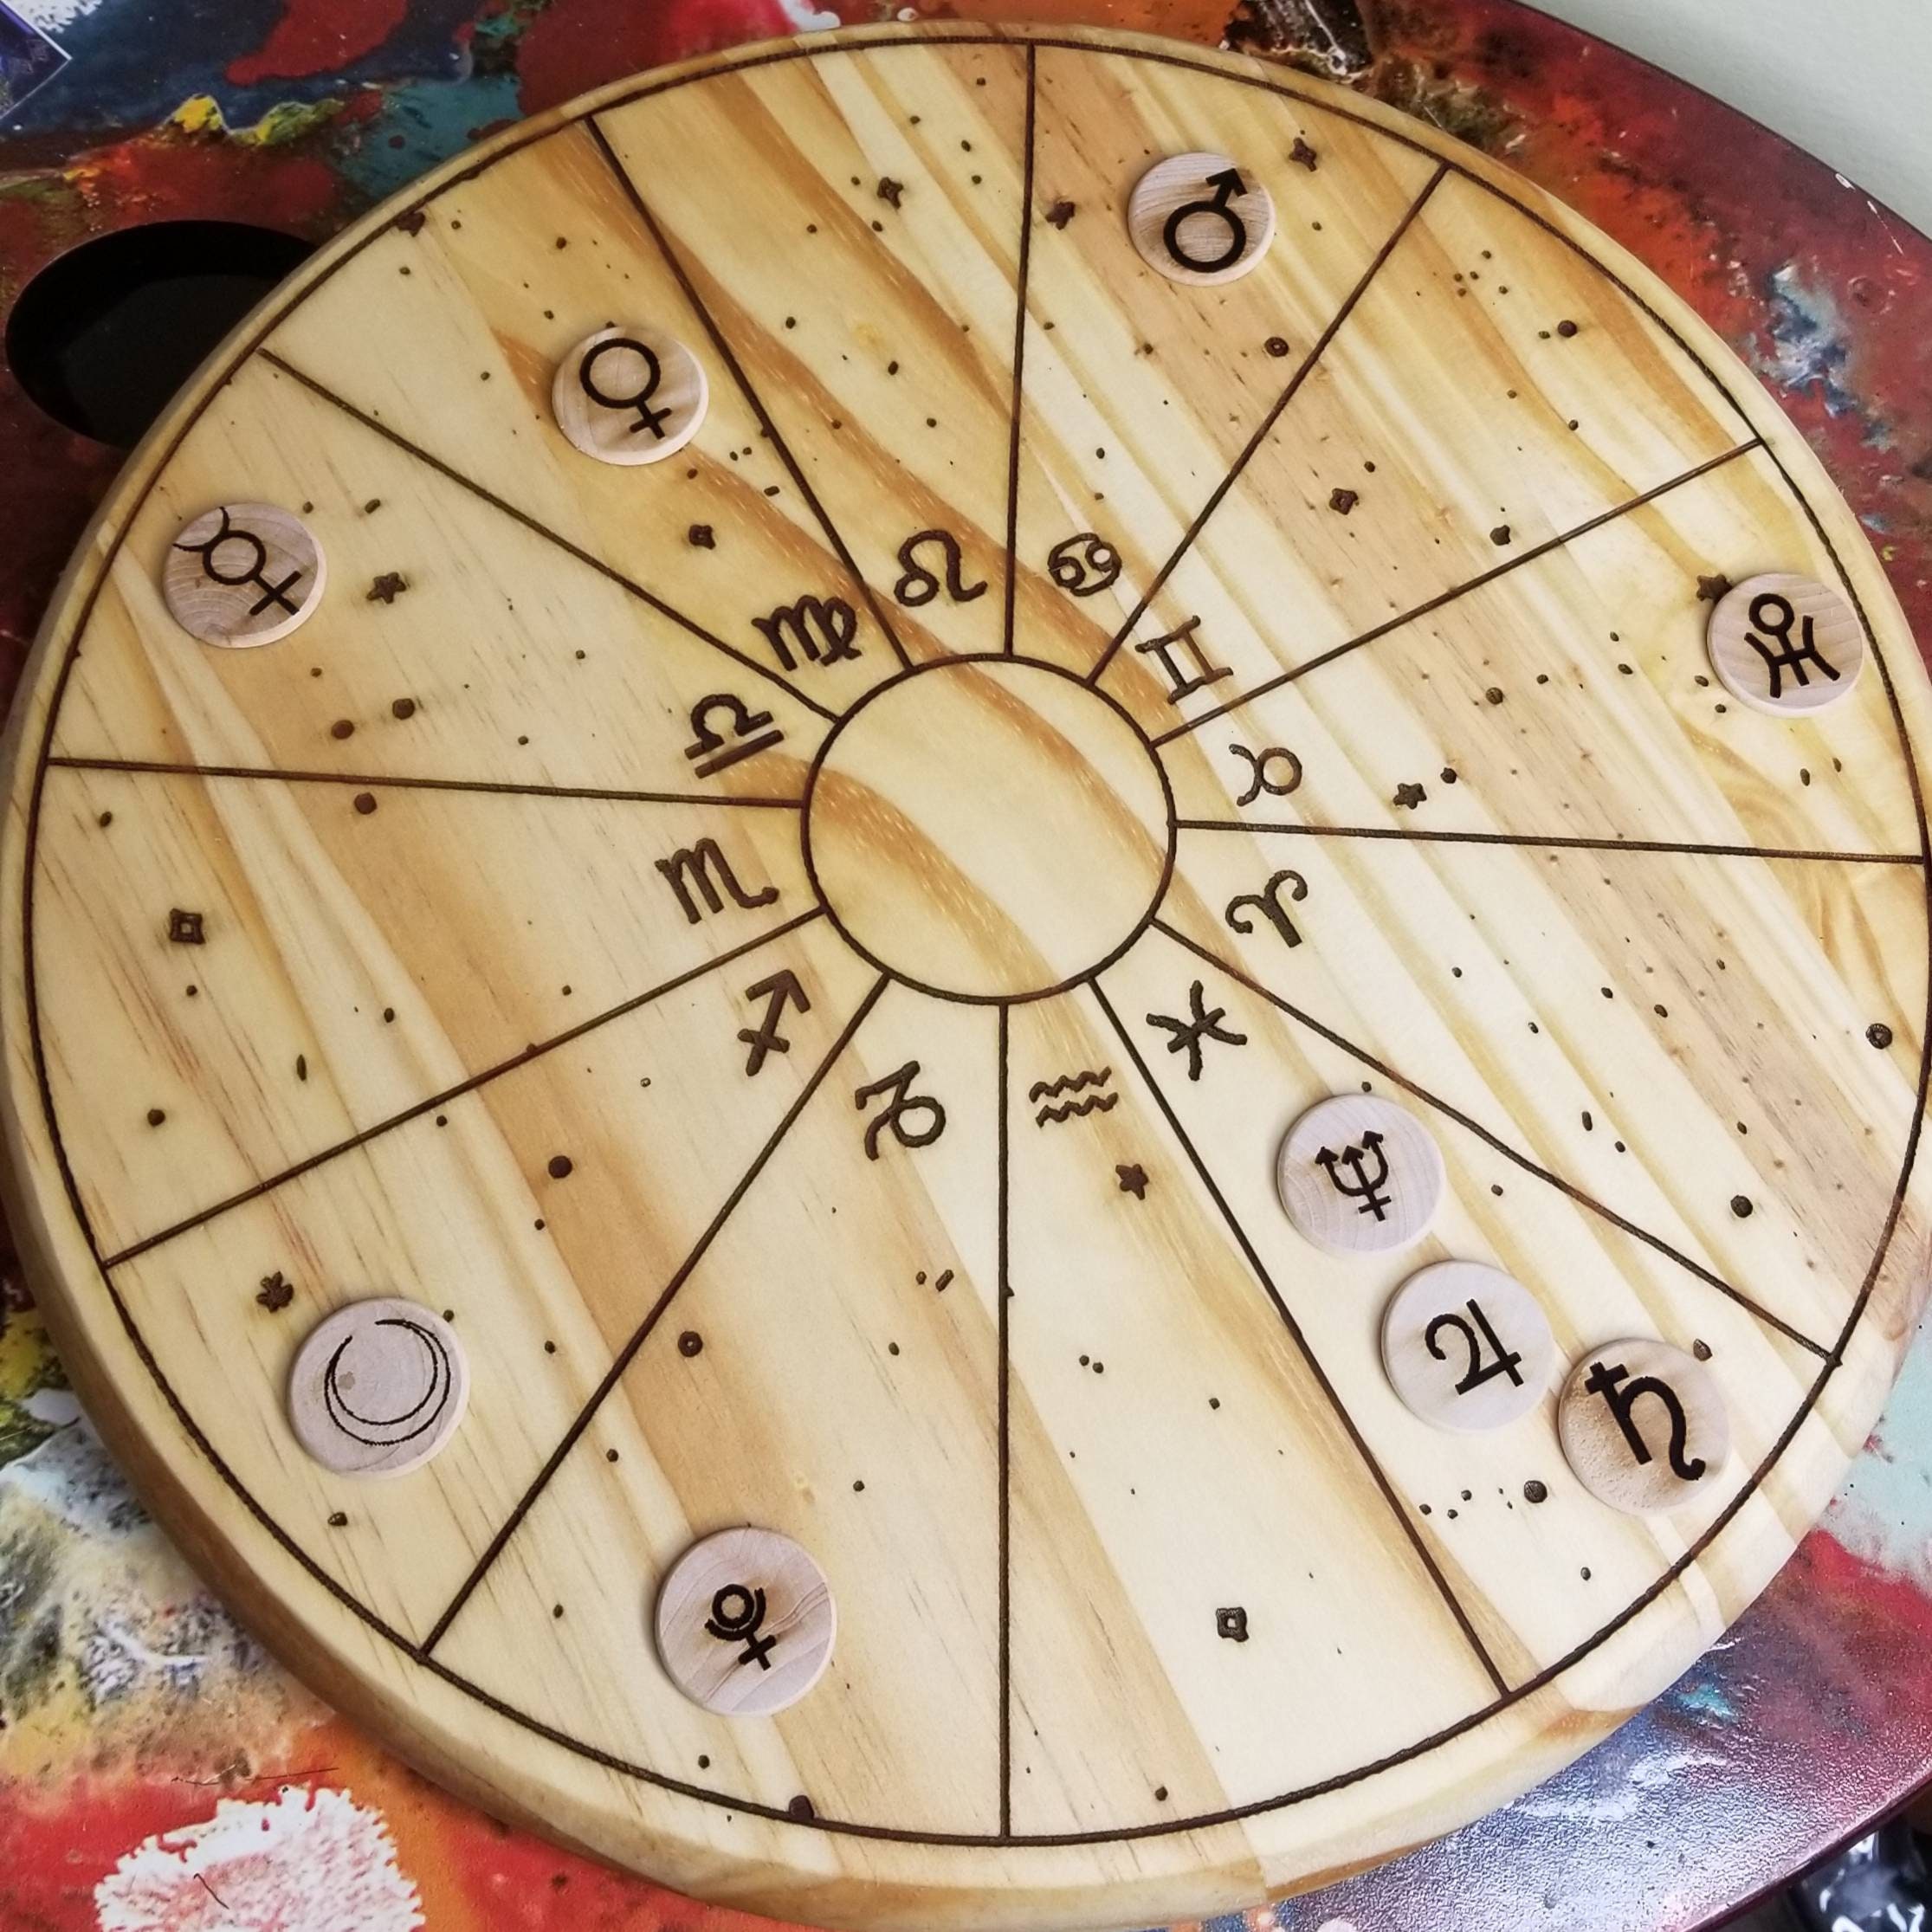 Magnetic Dry Erase Astrology Wheel Rotating Astrology Tools learn